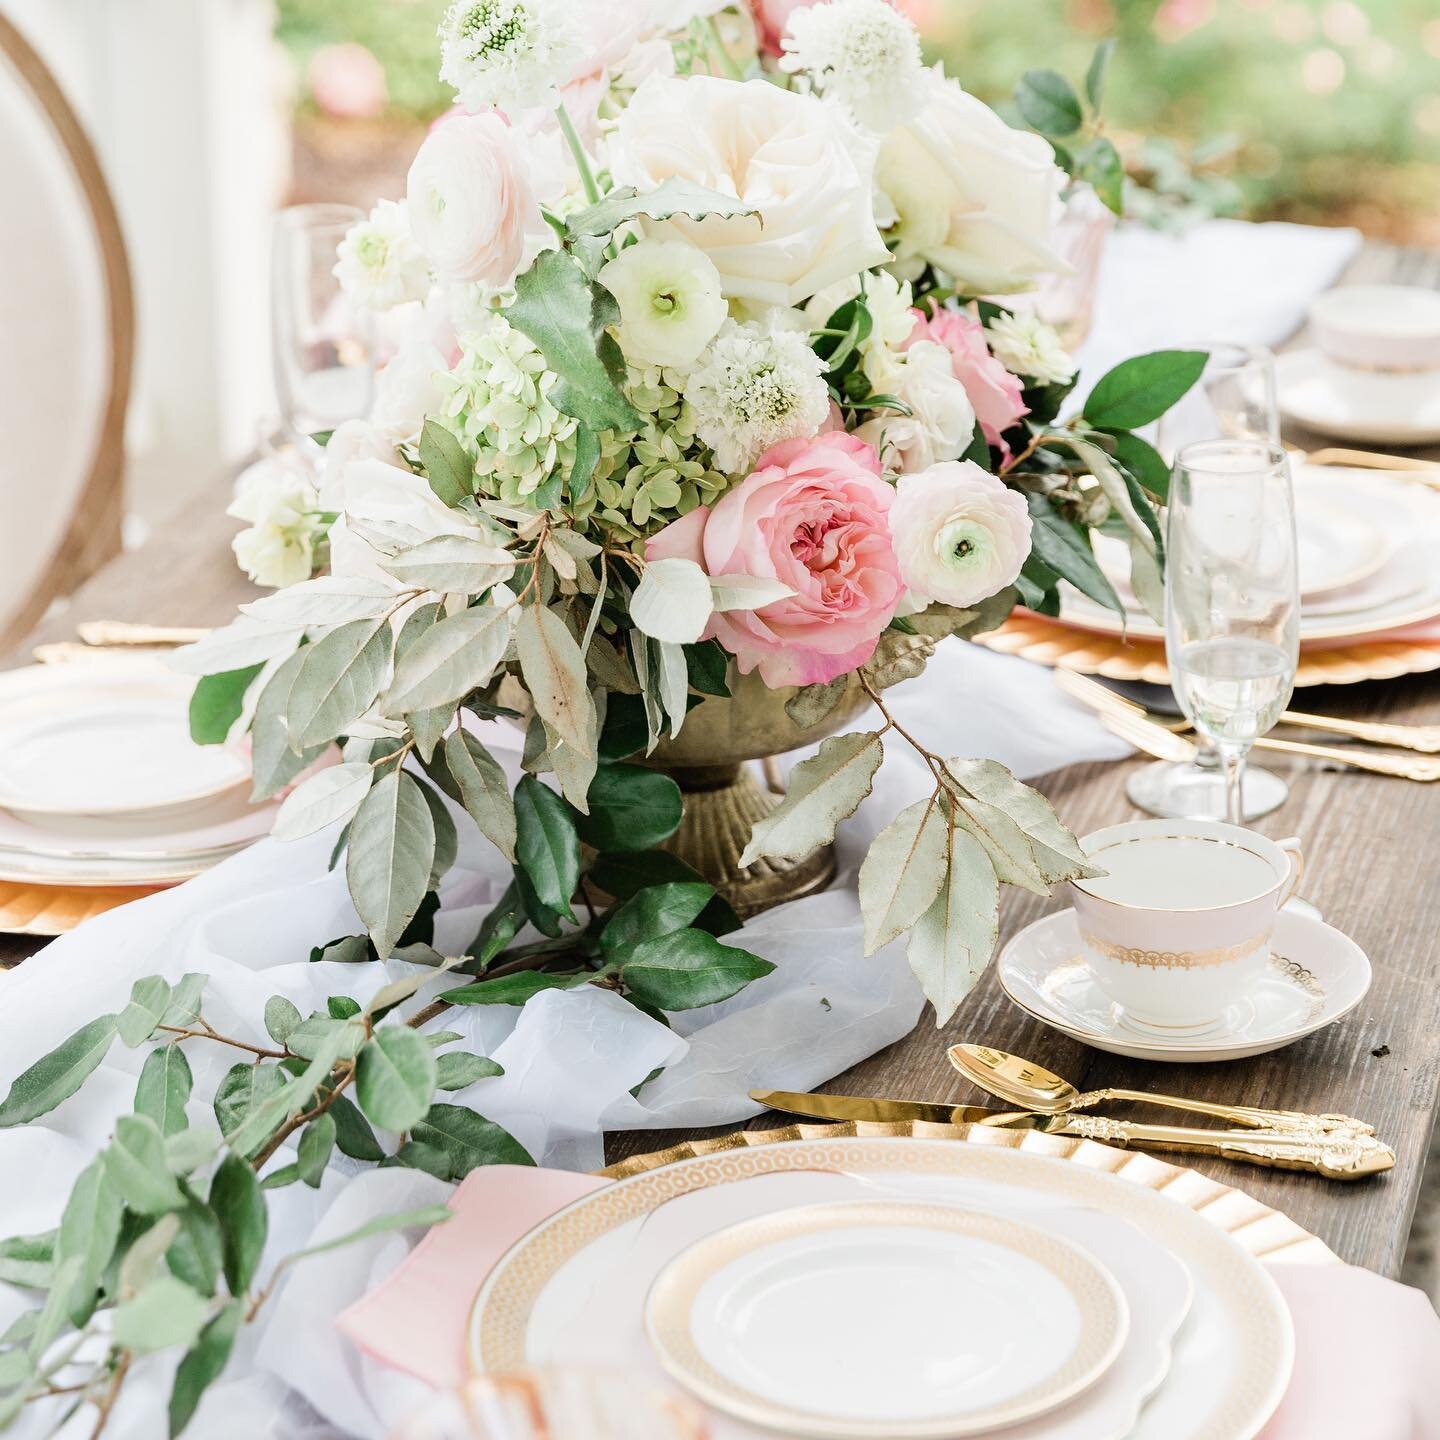 A pretty tea table set and ready for a pretty tea with friends... it&rsquo;s always a great day for tea!  Happy Friday!!

Photographer  @tsloan_photos 
Planning/Design  @lauryne.weddings 
Tableware  @teaandoldroses 
Gourmet teas  @tea_andtime 
.
.
.
